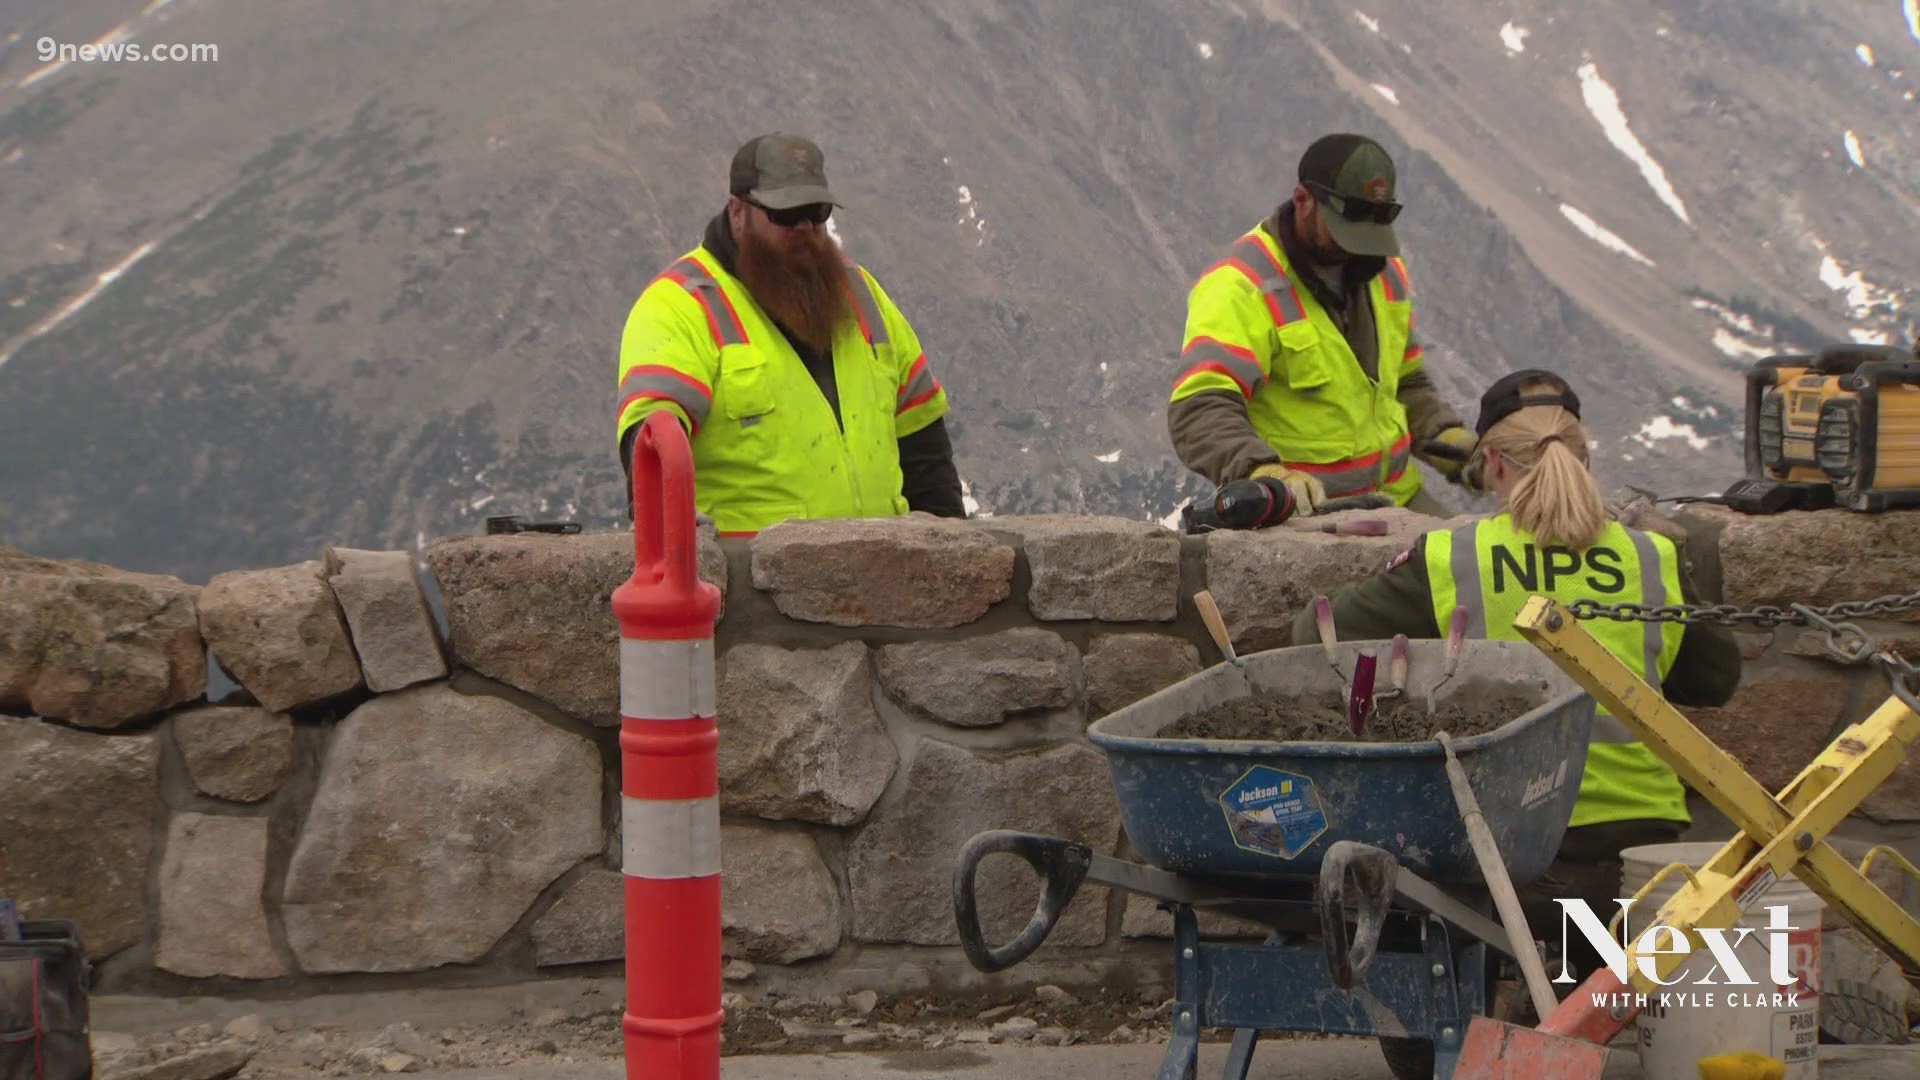 Walls in Rocky Mountain National Park, built by Civilian Conservation Corps in the 1930s, are being restored to their original glory.